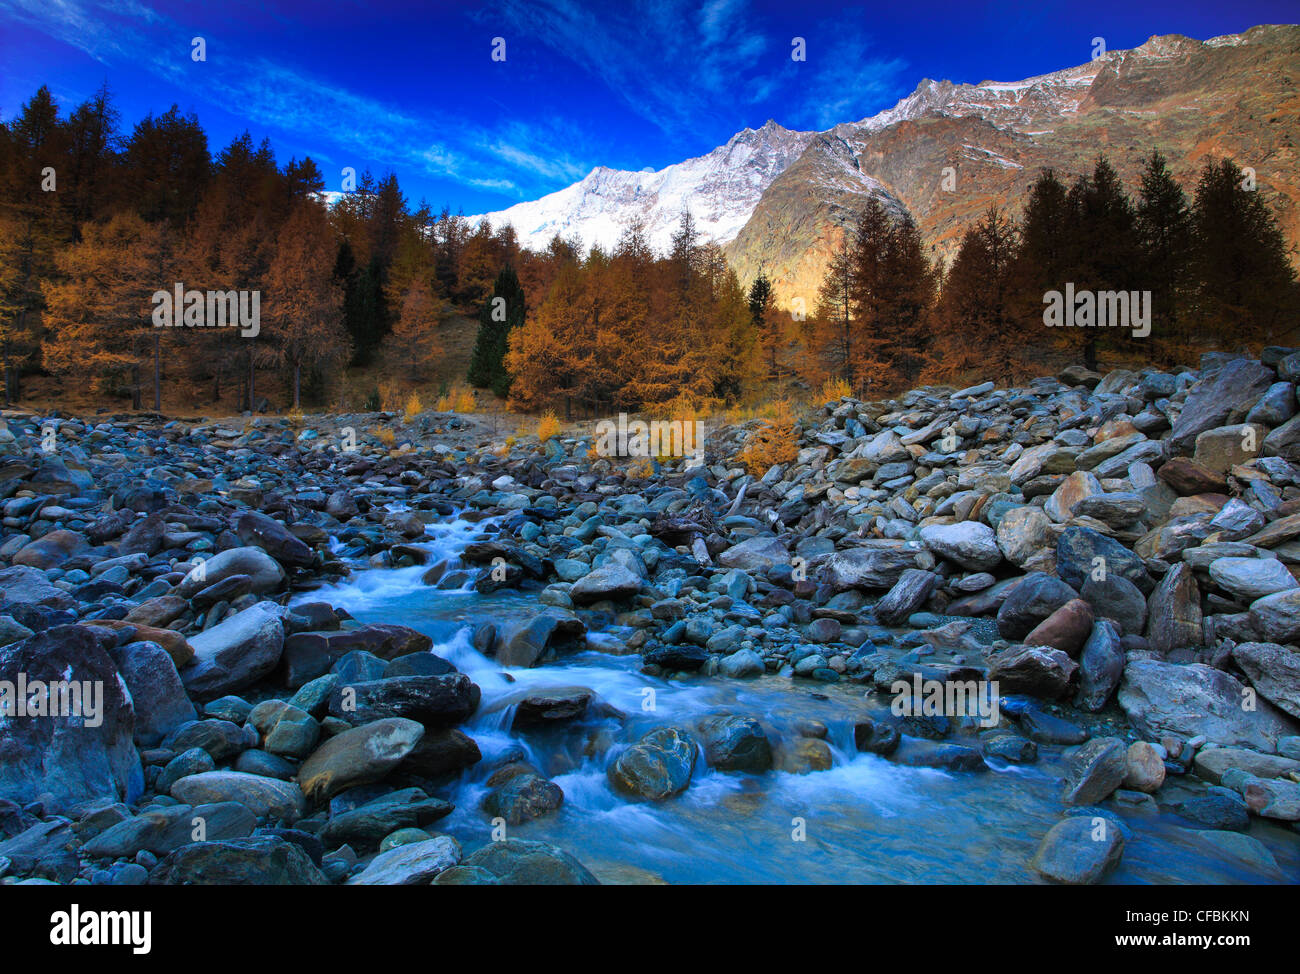 Riverbed, autumn, colors, larch, larches, larch wood, Saas Fee, valley of Saas, sunshine, valley, Valais, Switzerland, Europe, s Stock Photo